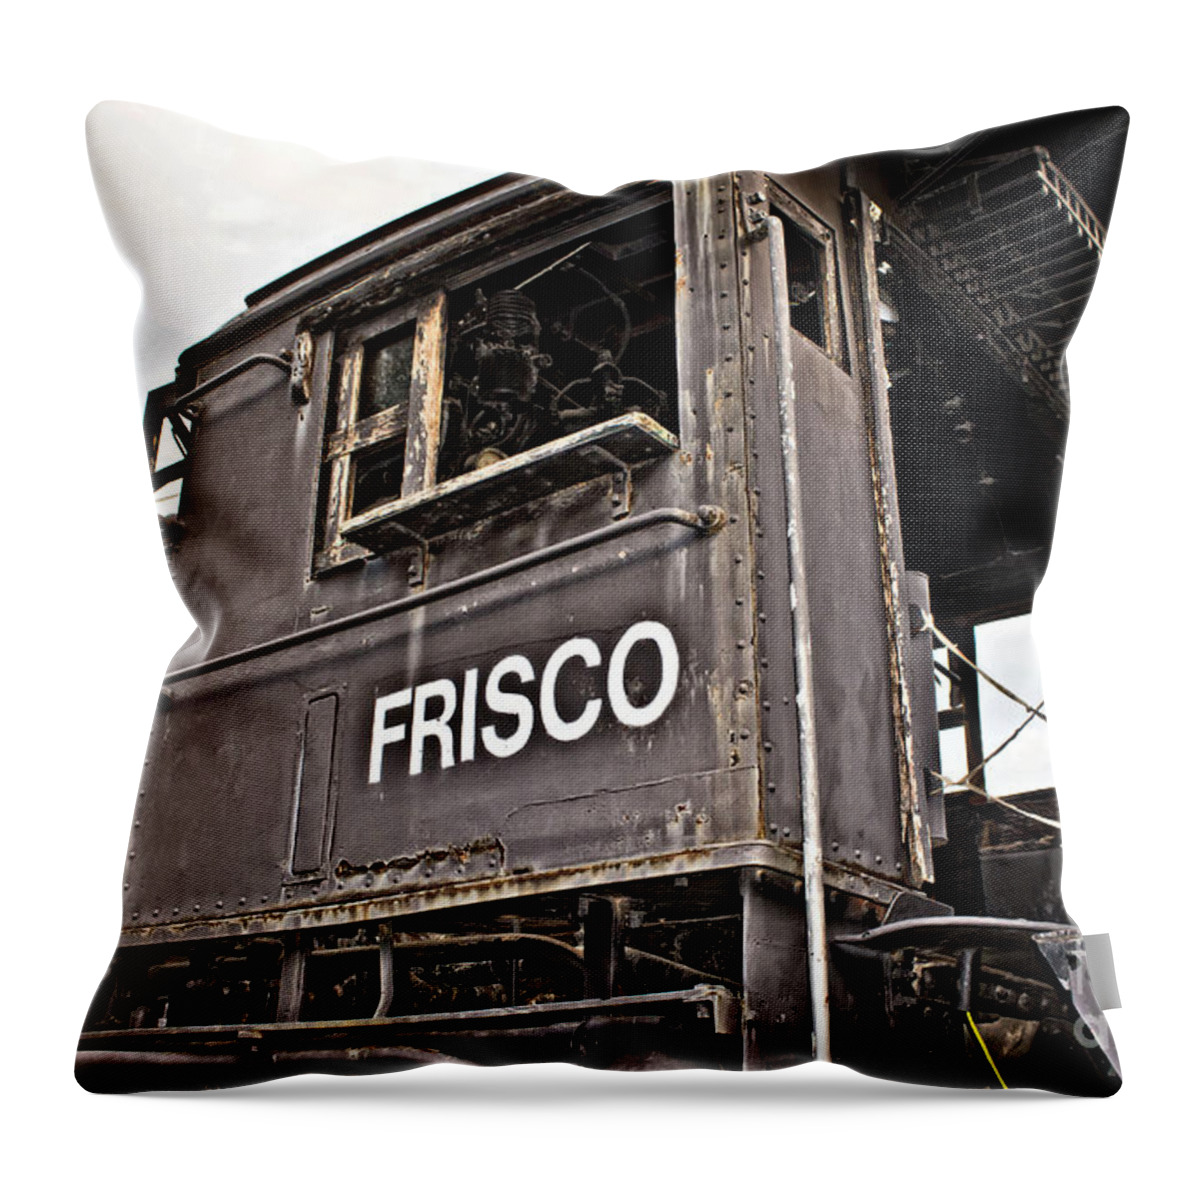 Frisco Throw Pillow featuring the photograph Frisco Locamotive Cab by Ms Judi